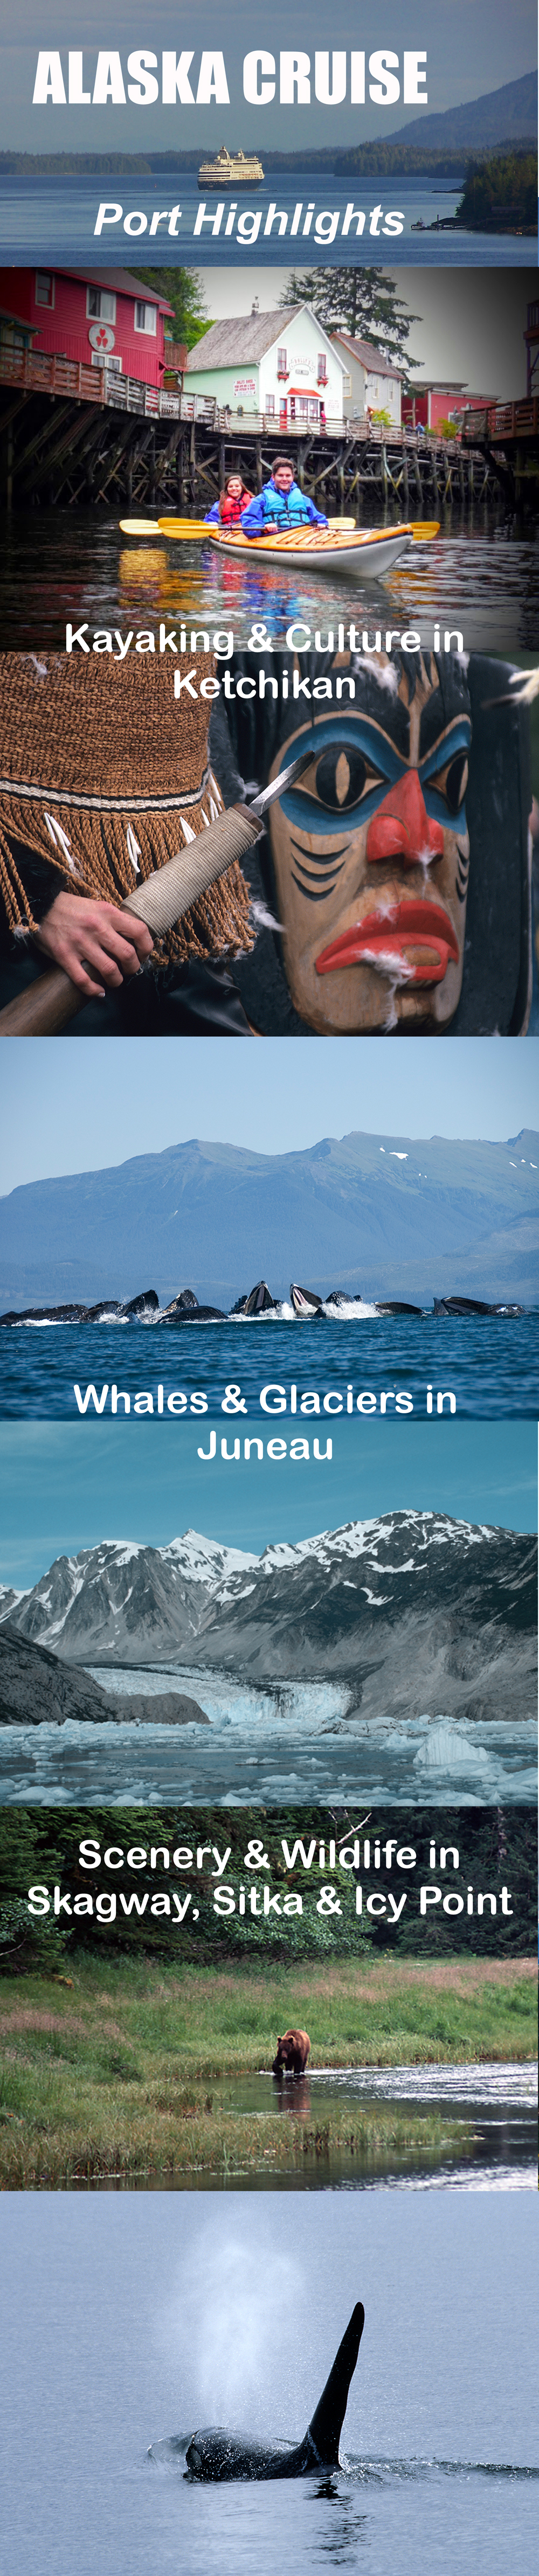  Going on an Alaska Cruise? There are so many tours and shore excursions to choose from. Here's a locals guide to the highlights in each port and tips on finding great excursions in Alaska. 